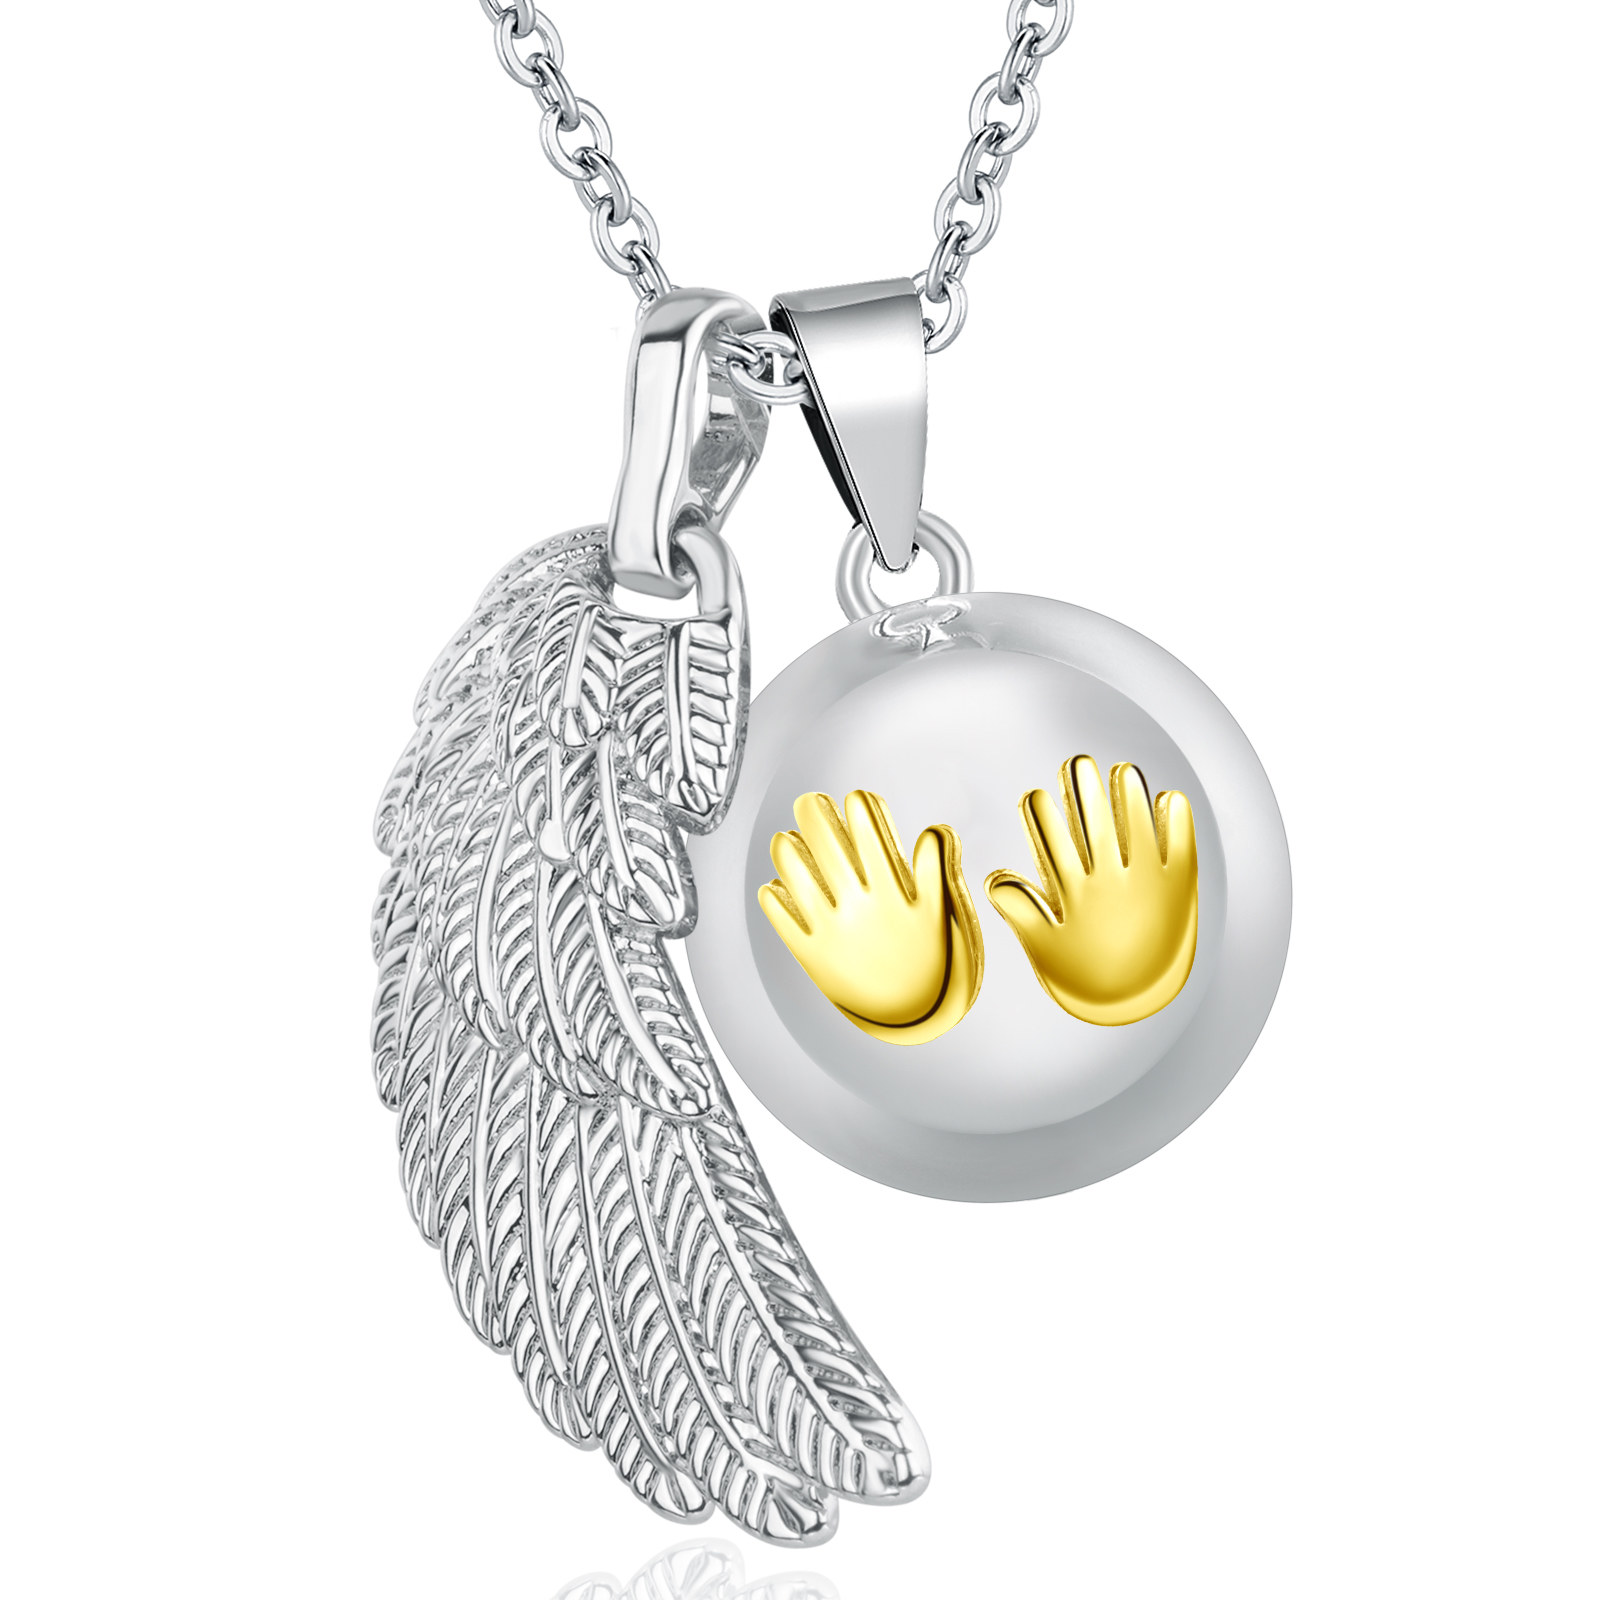 Merryshine Jewelry Wholesale Baby's Handprint 925 Sterling Silver Charms Bola Harmony Necklace